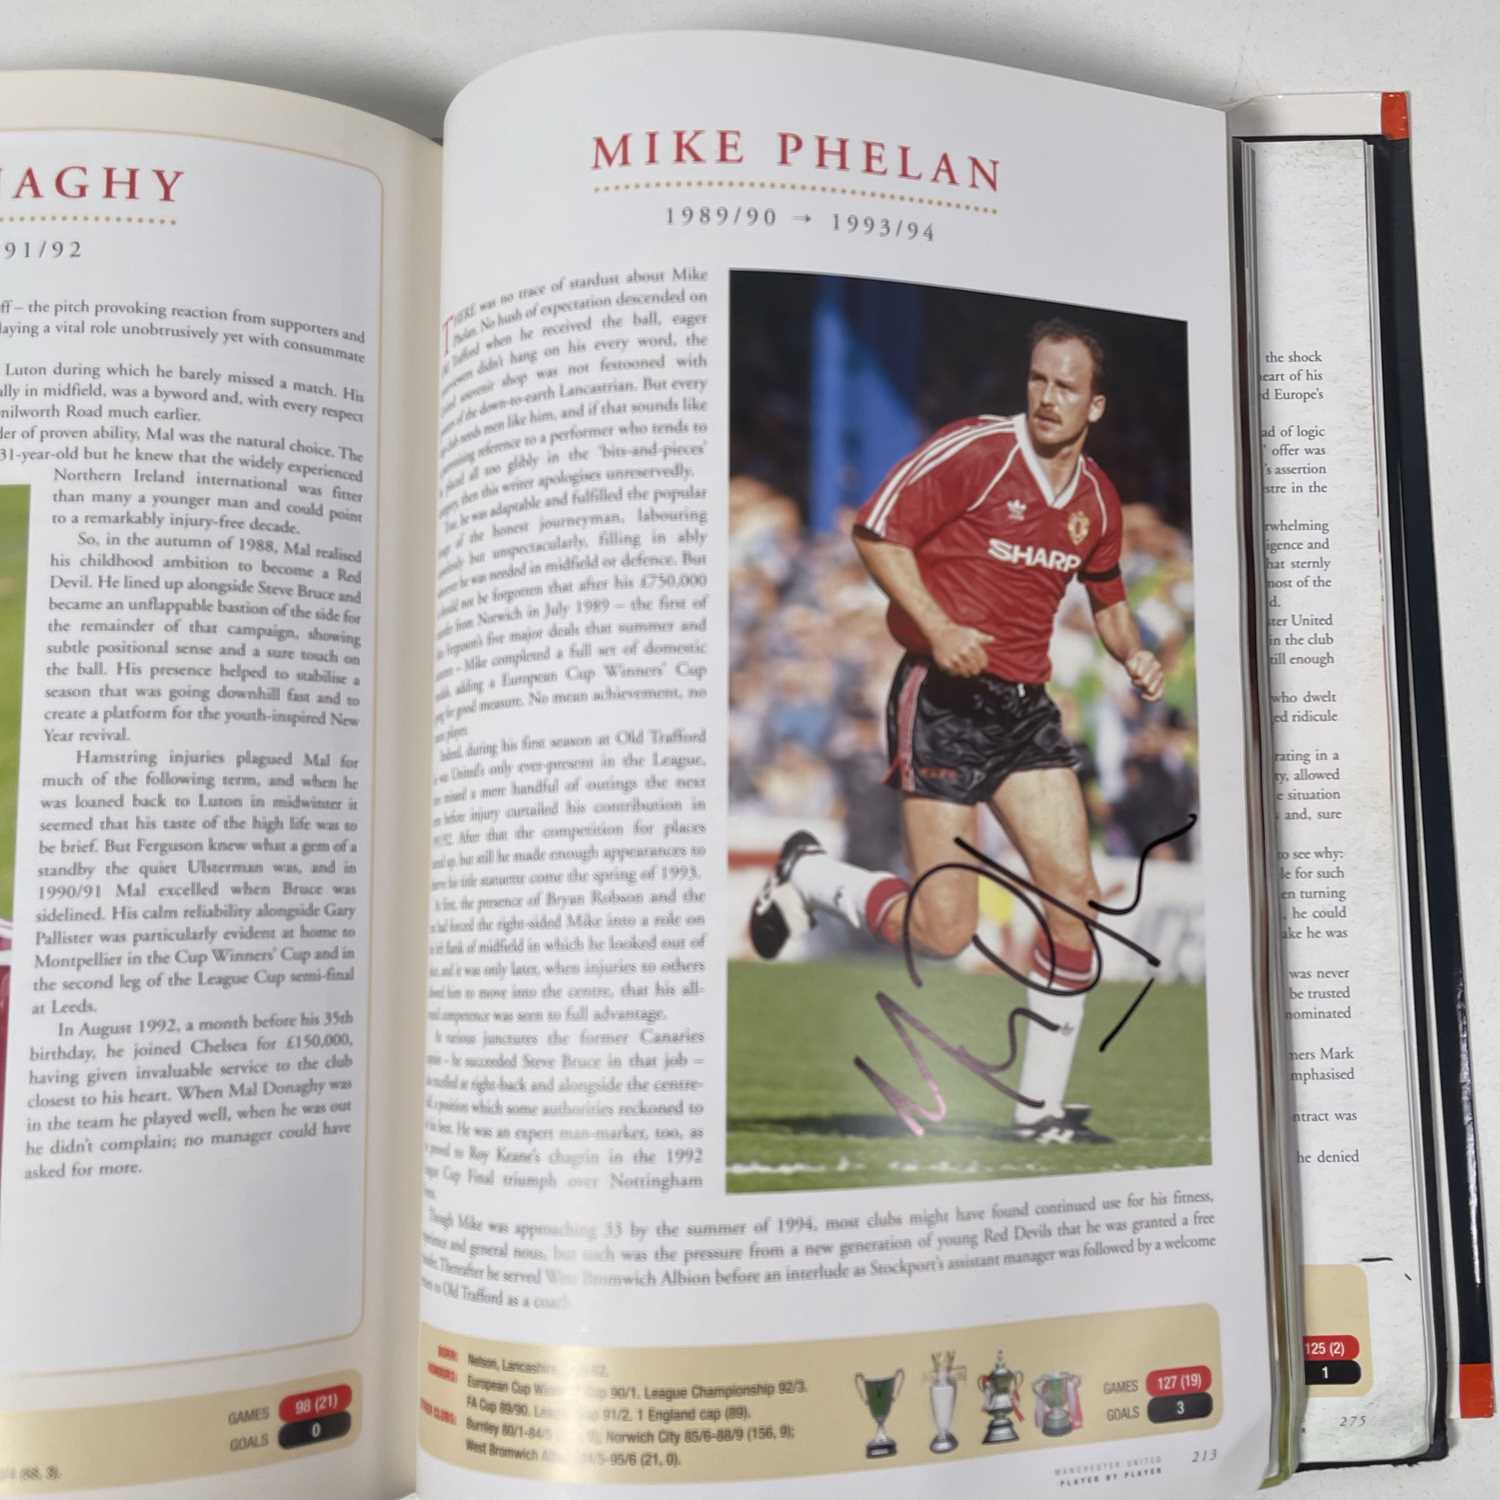 FOOTBALL MEMORABILIA - MANCHESTER UNITED MULTI SIGNED 'PLAYER BY PLAYER' BOOK. - Image 35 of 50